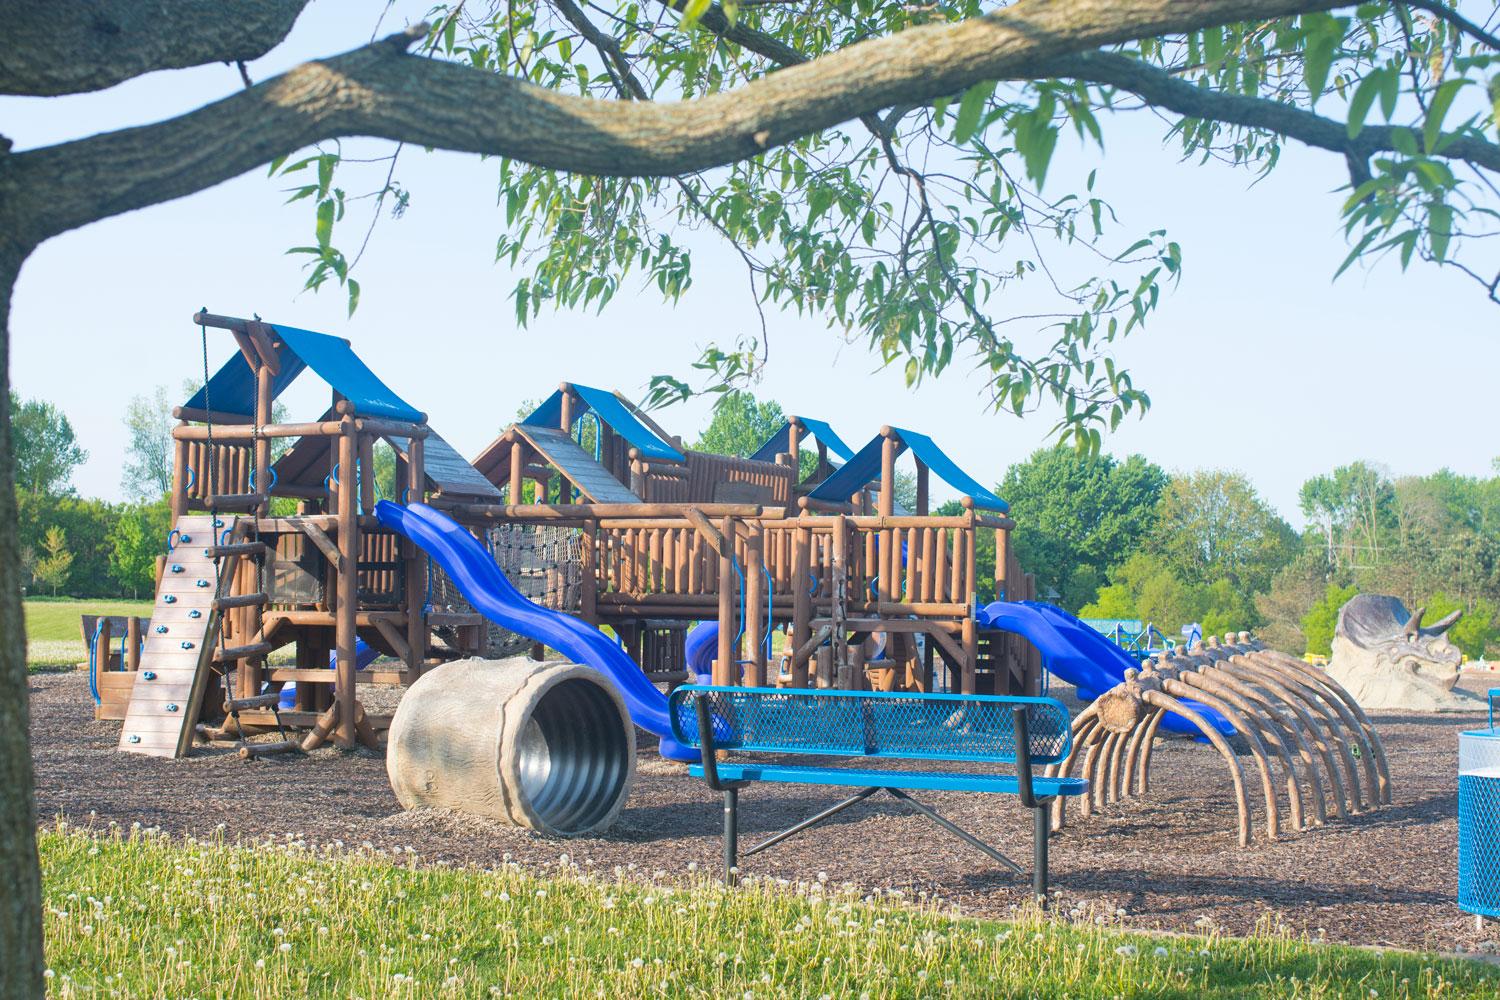 Playground: Large wooden playground with blue canopies and slides